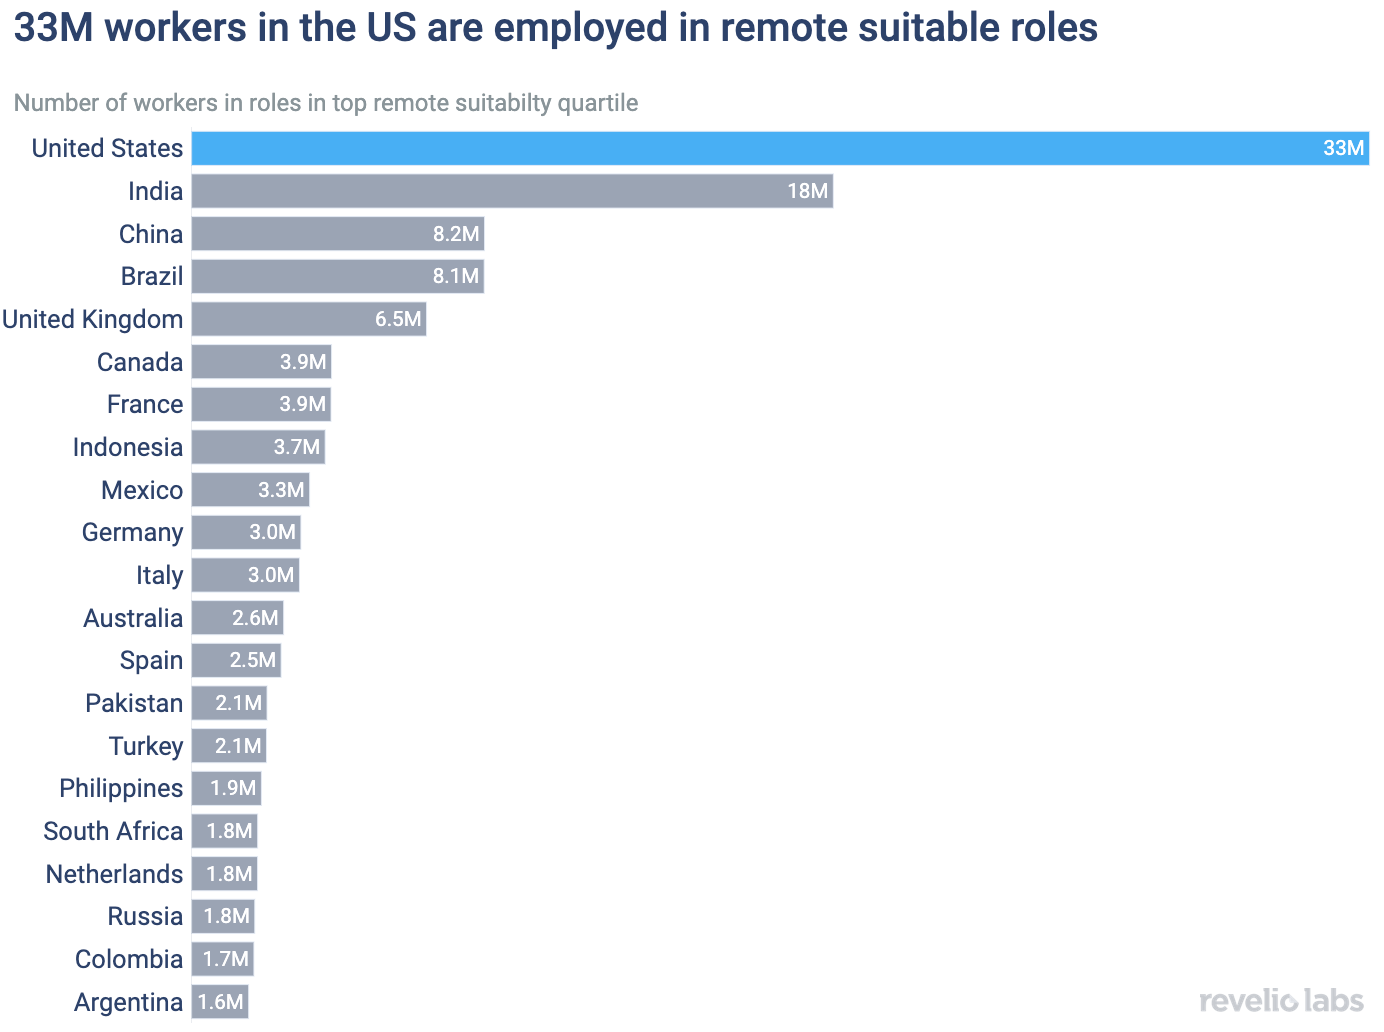 33M workers in the US are employed in remote suitable roles